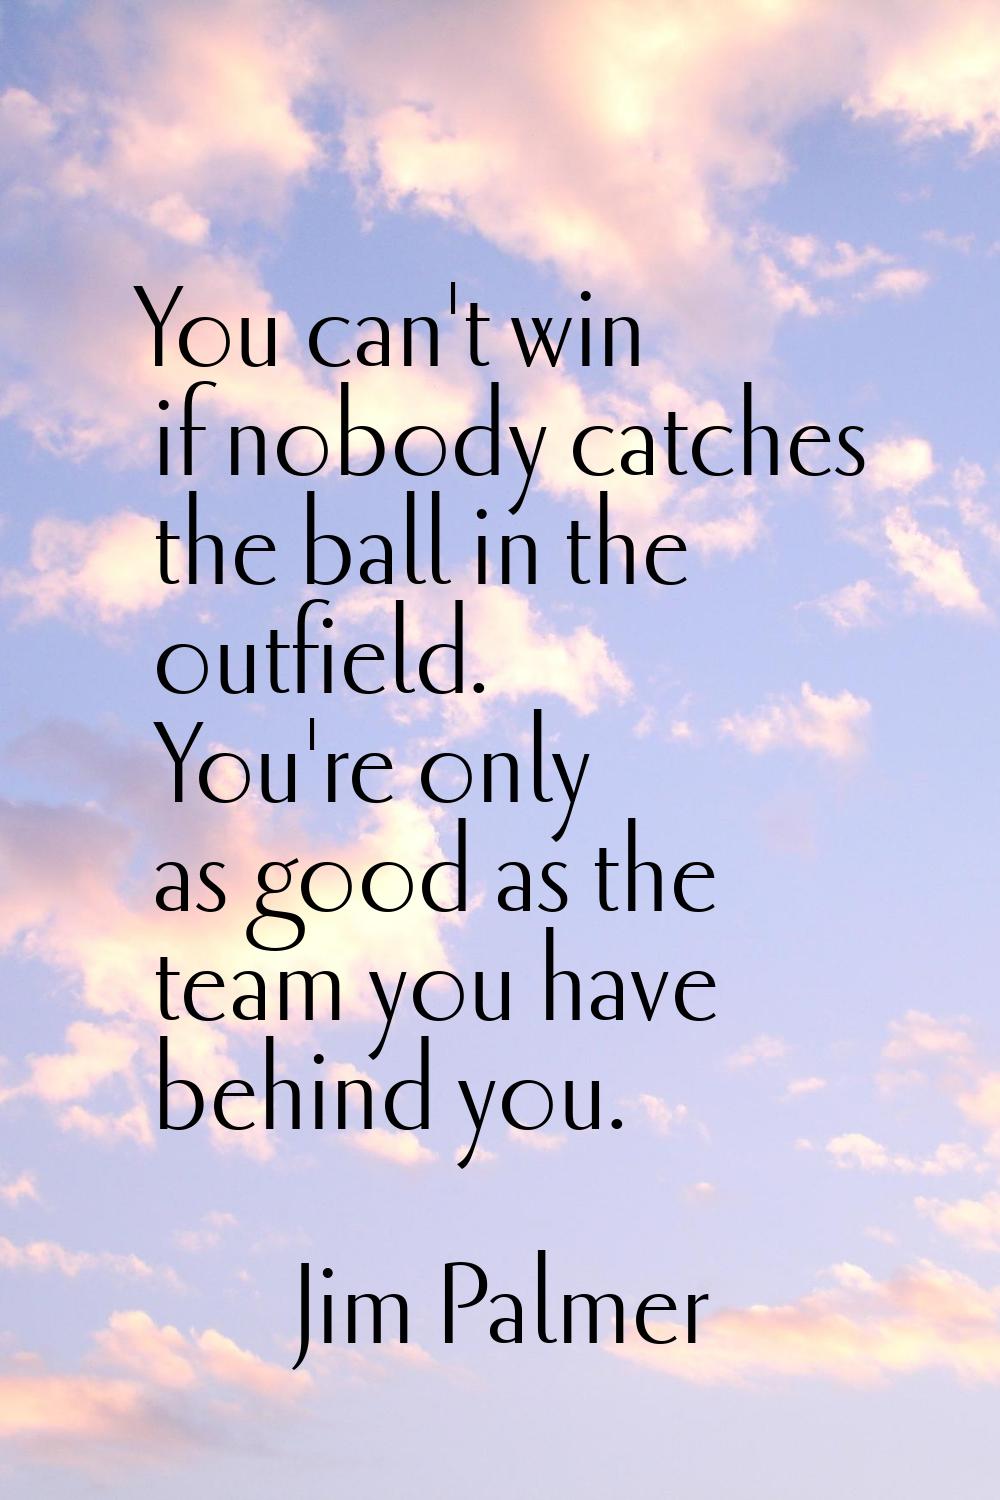 You can't win if nobody catches the ball in the outfield. You're only as good as the team you have 